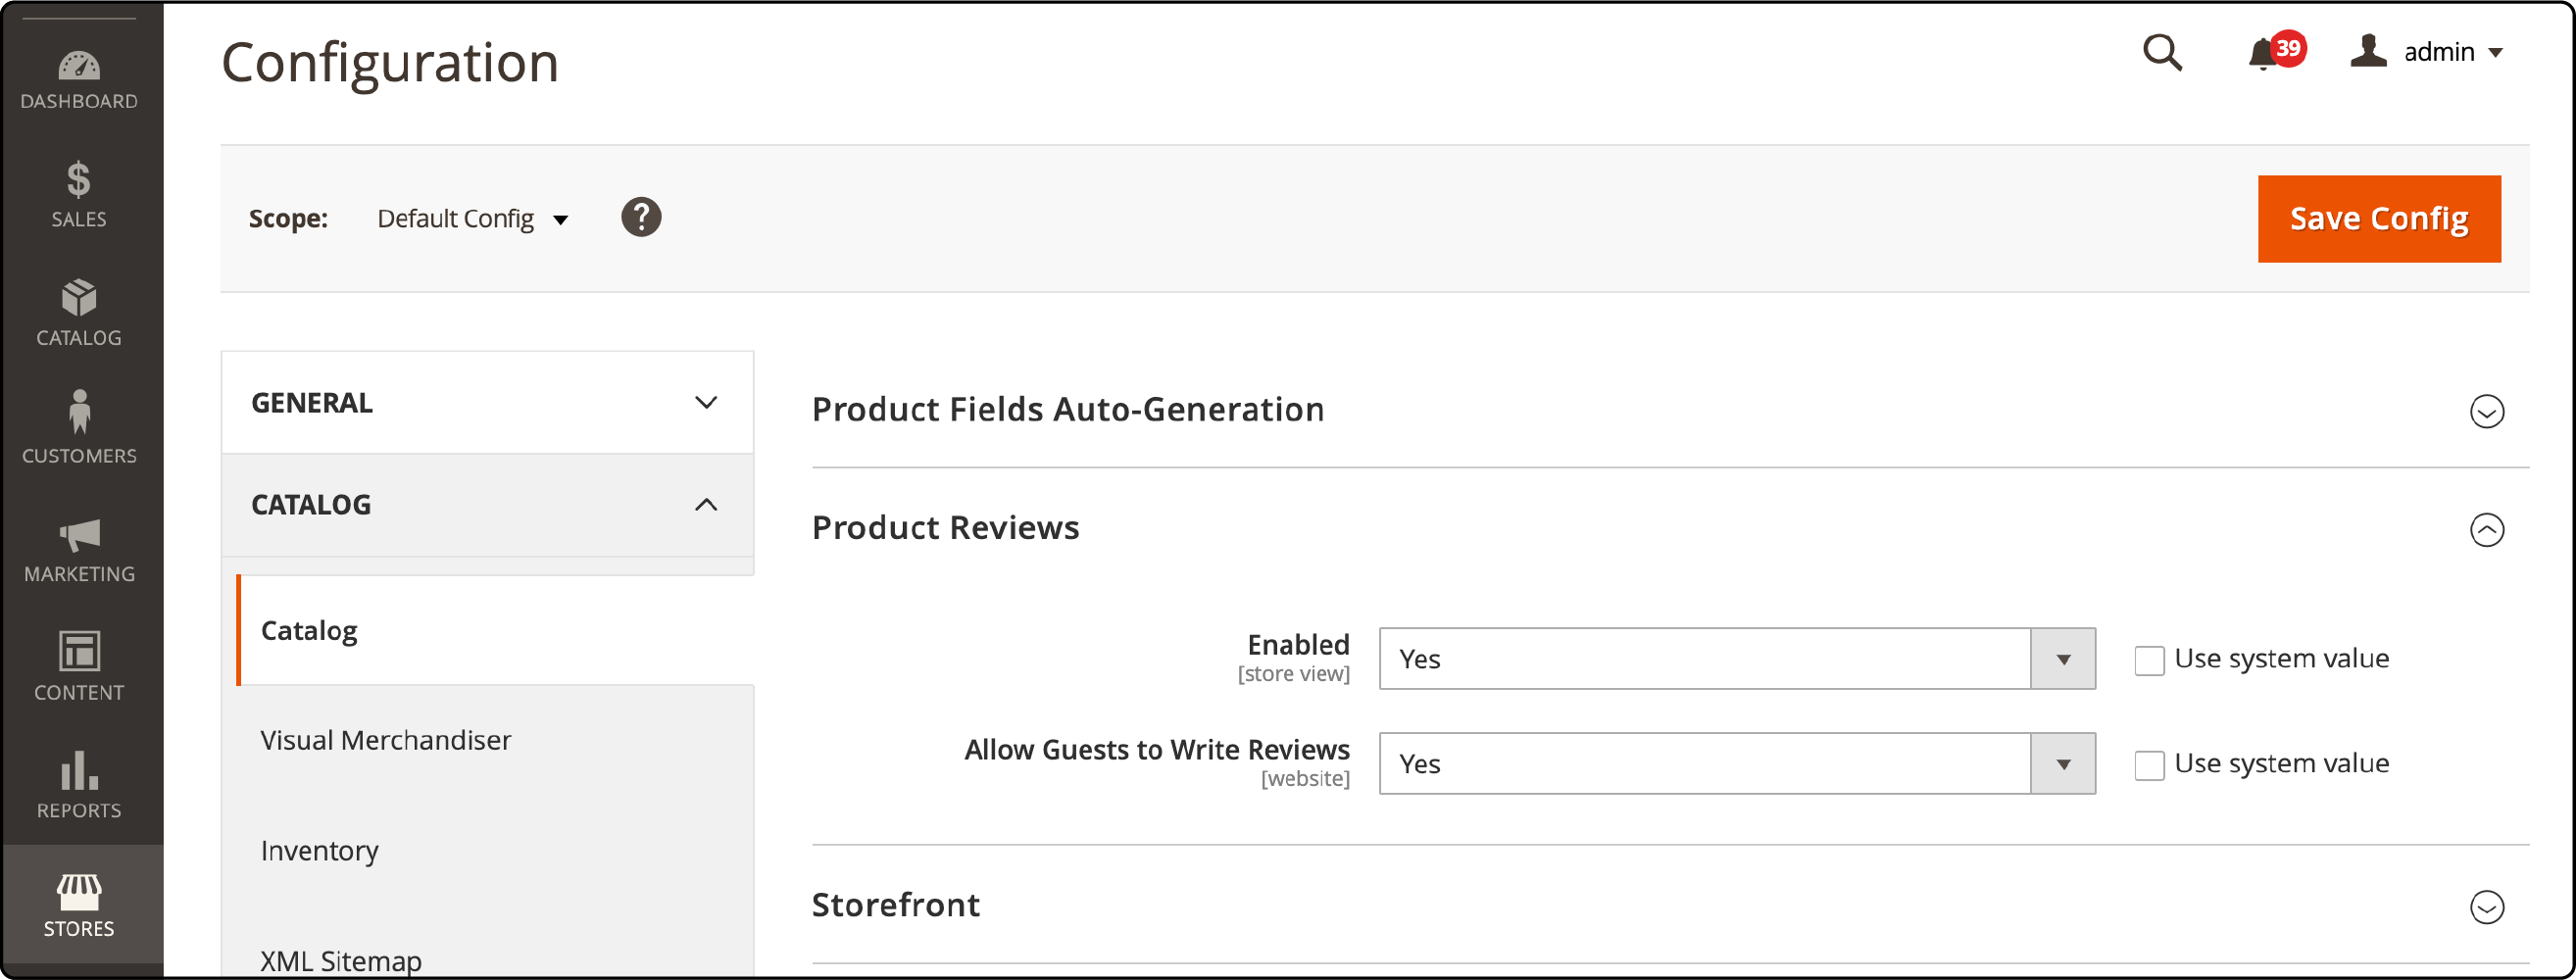 Step-by-step guide on configuring general product reviews in Magento 2